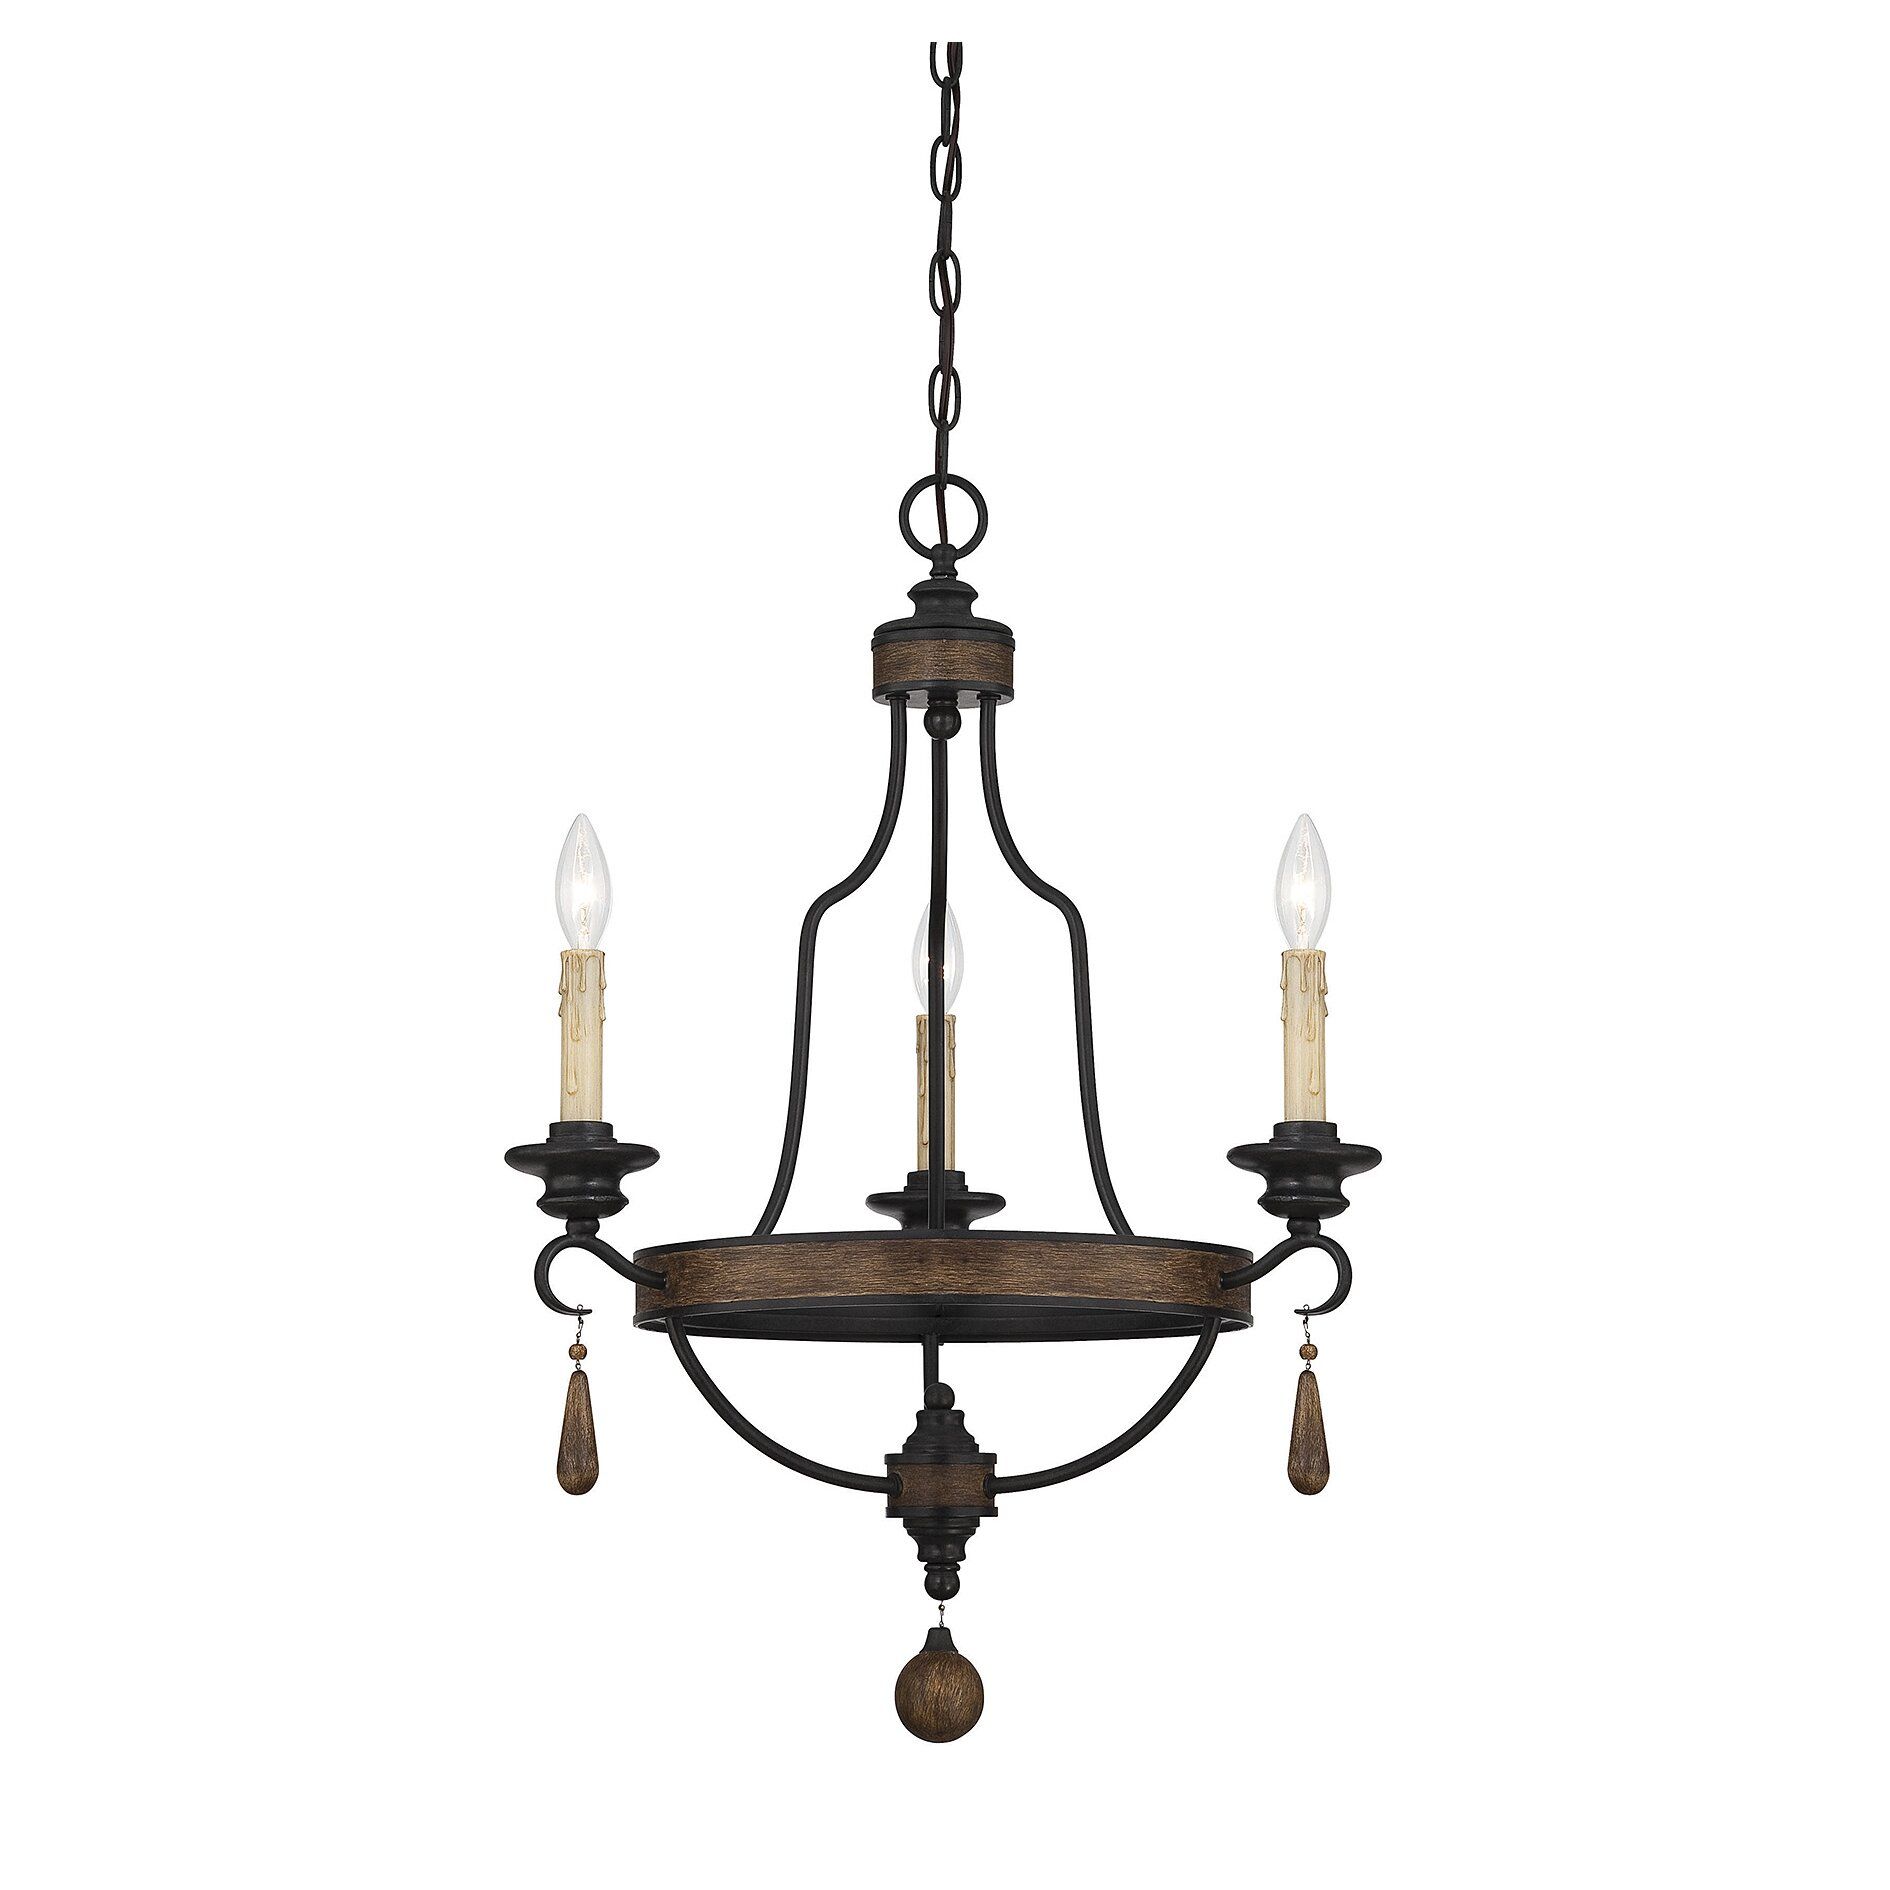 Savoy House Kelsey 3 Light Candle Chandelier & Reviews For 3 Light Pendant Chandeliers (View 6 of 15)